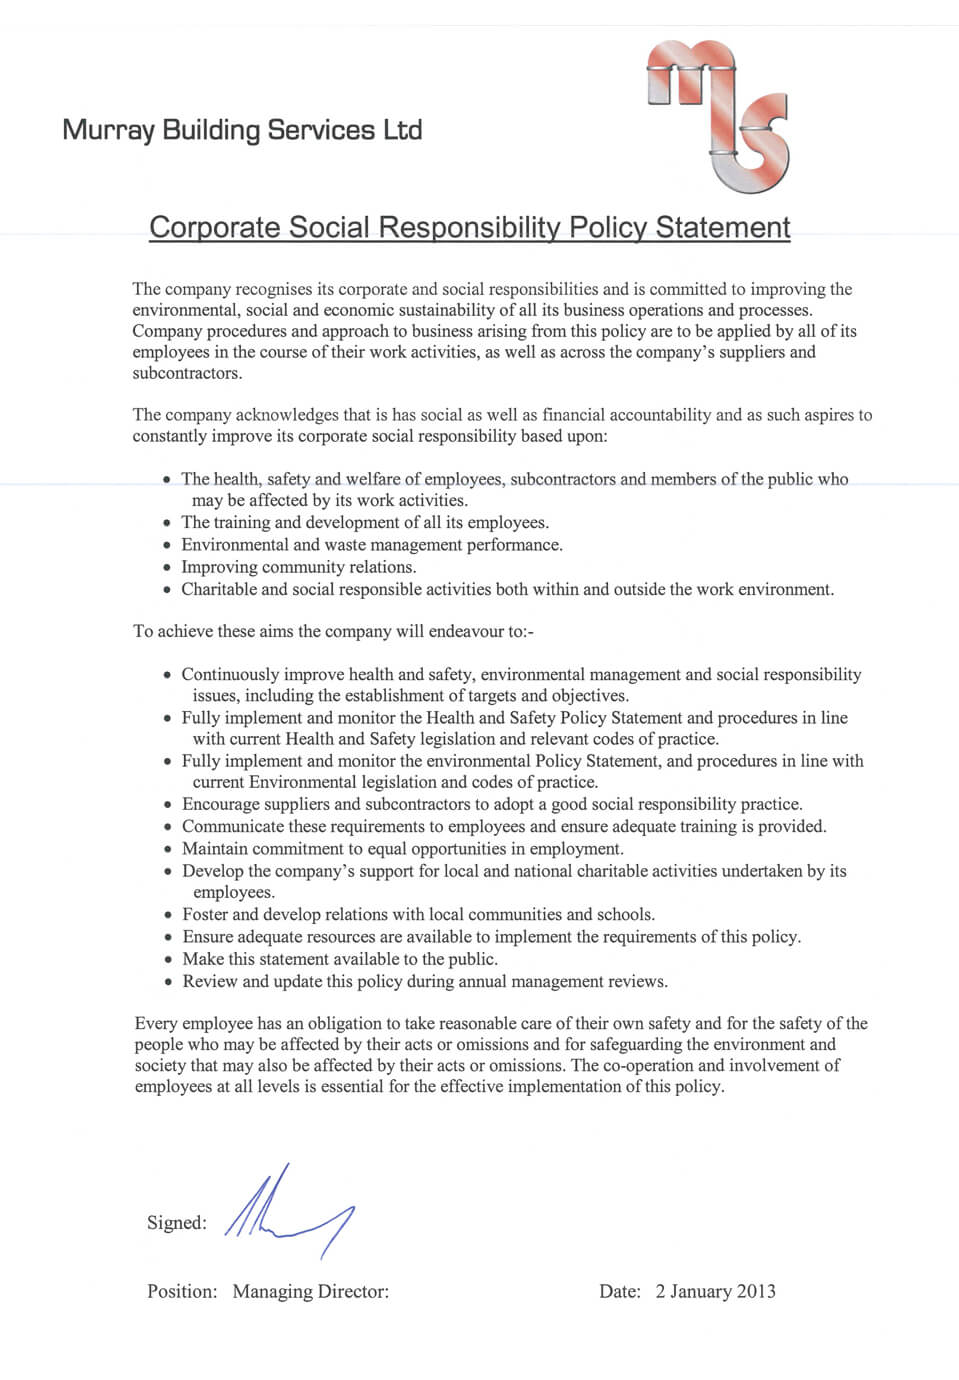 Corporate Social Responsibility Policy Statement